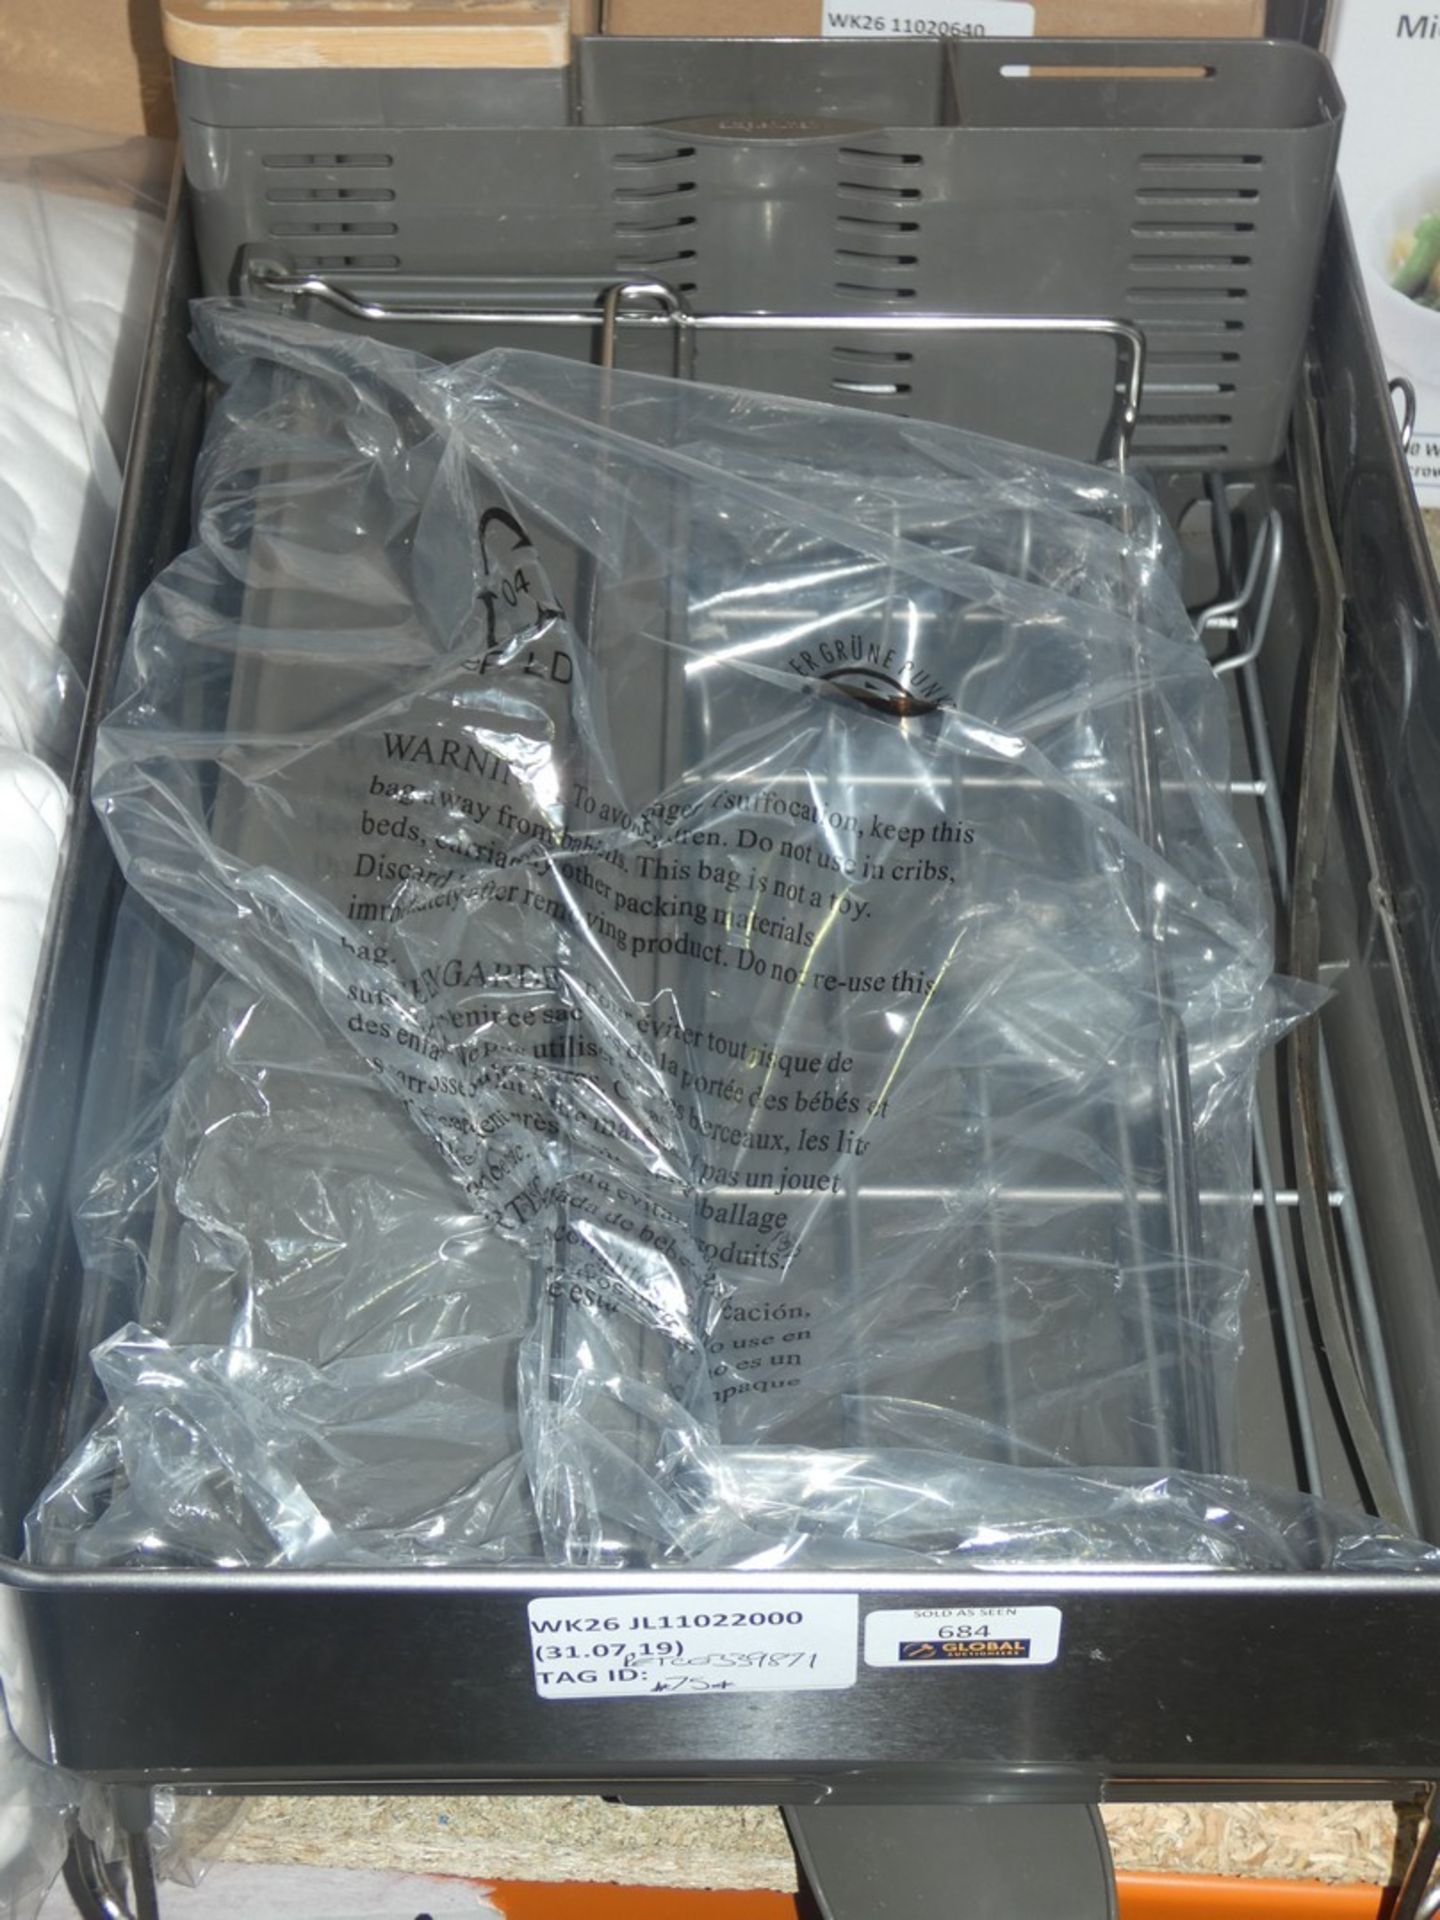 Stainless Steel Simple Human Dish Draining Rack RRP£75.0 (RET00339871)(Viewings And Appraisals